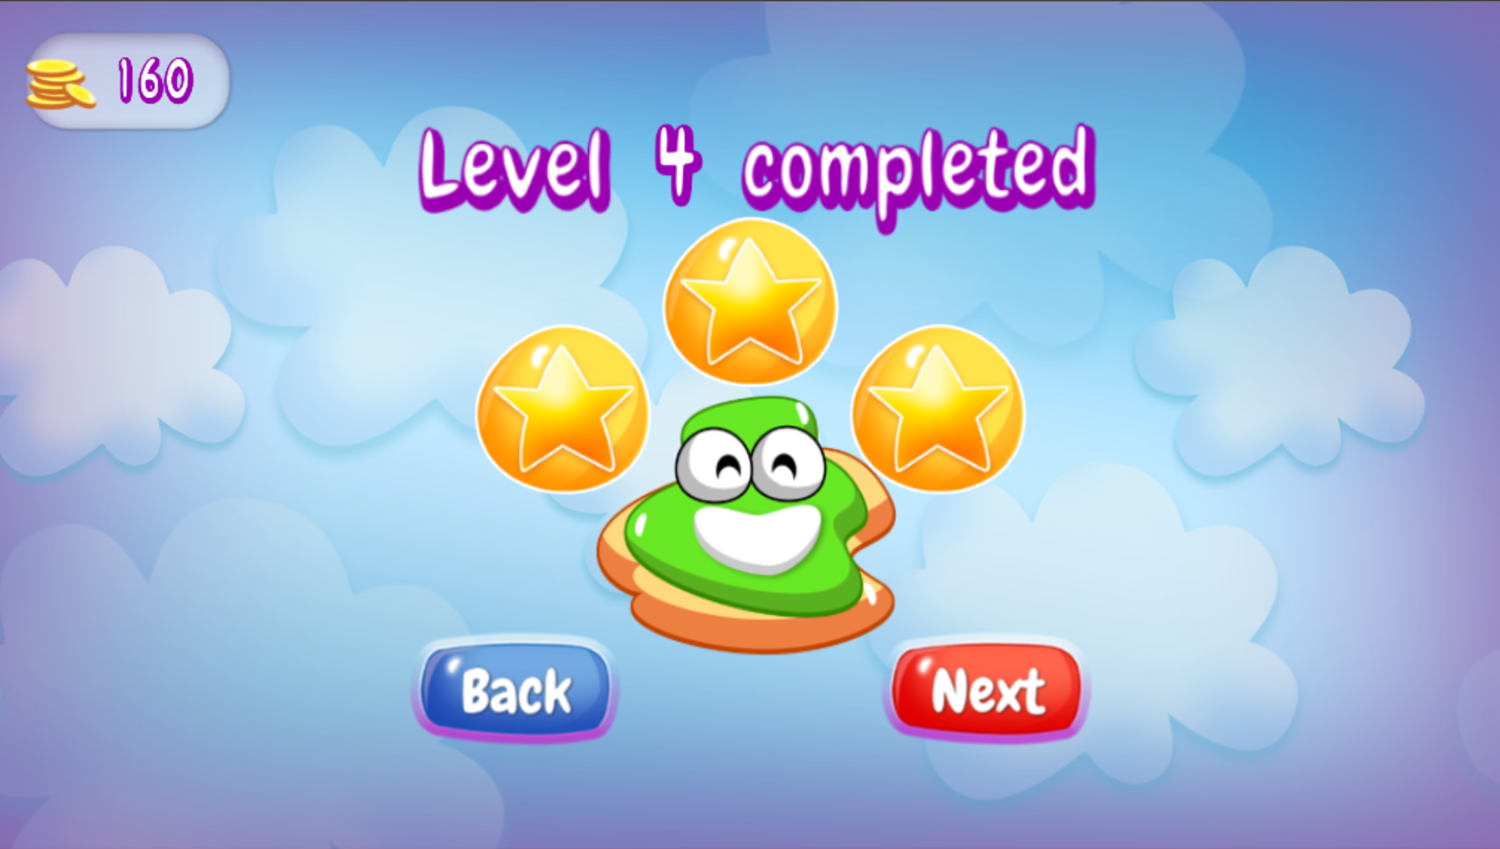 Jelly Slice Game Level Complete Screenshot.